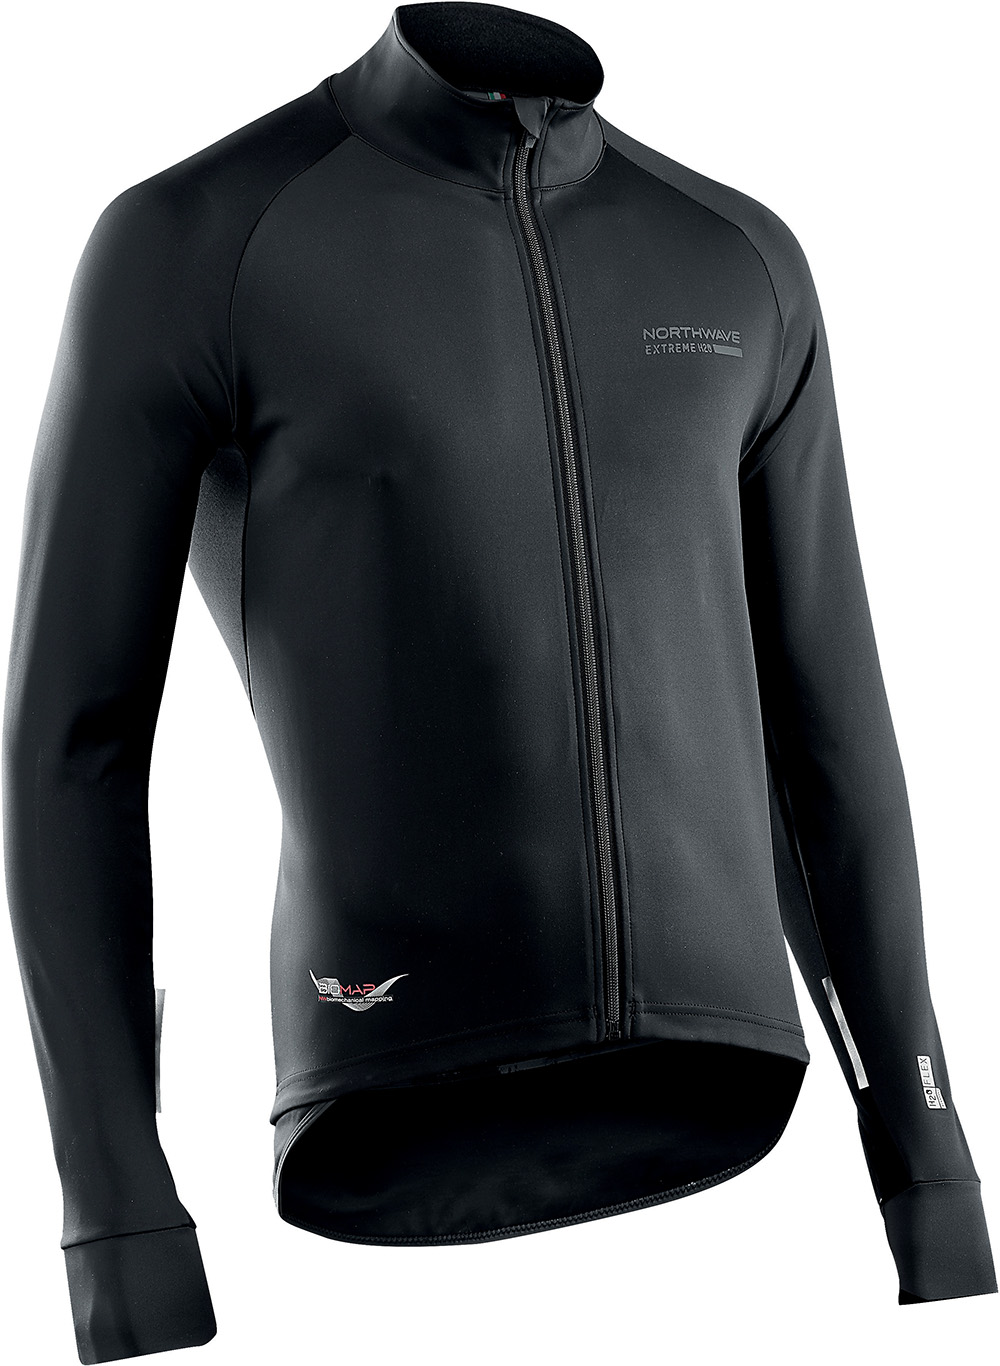 Giacca Ciclismo Maniche Lunghe Northwave Extreme H20 Jacket BLACK